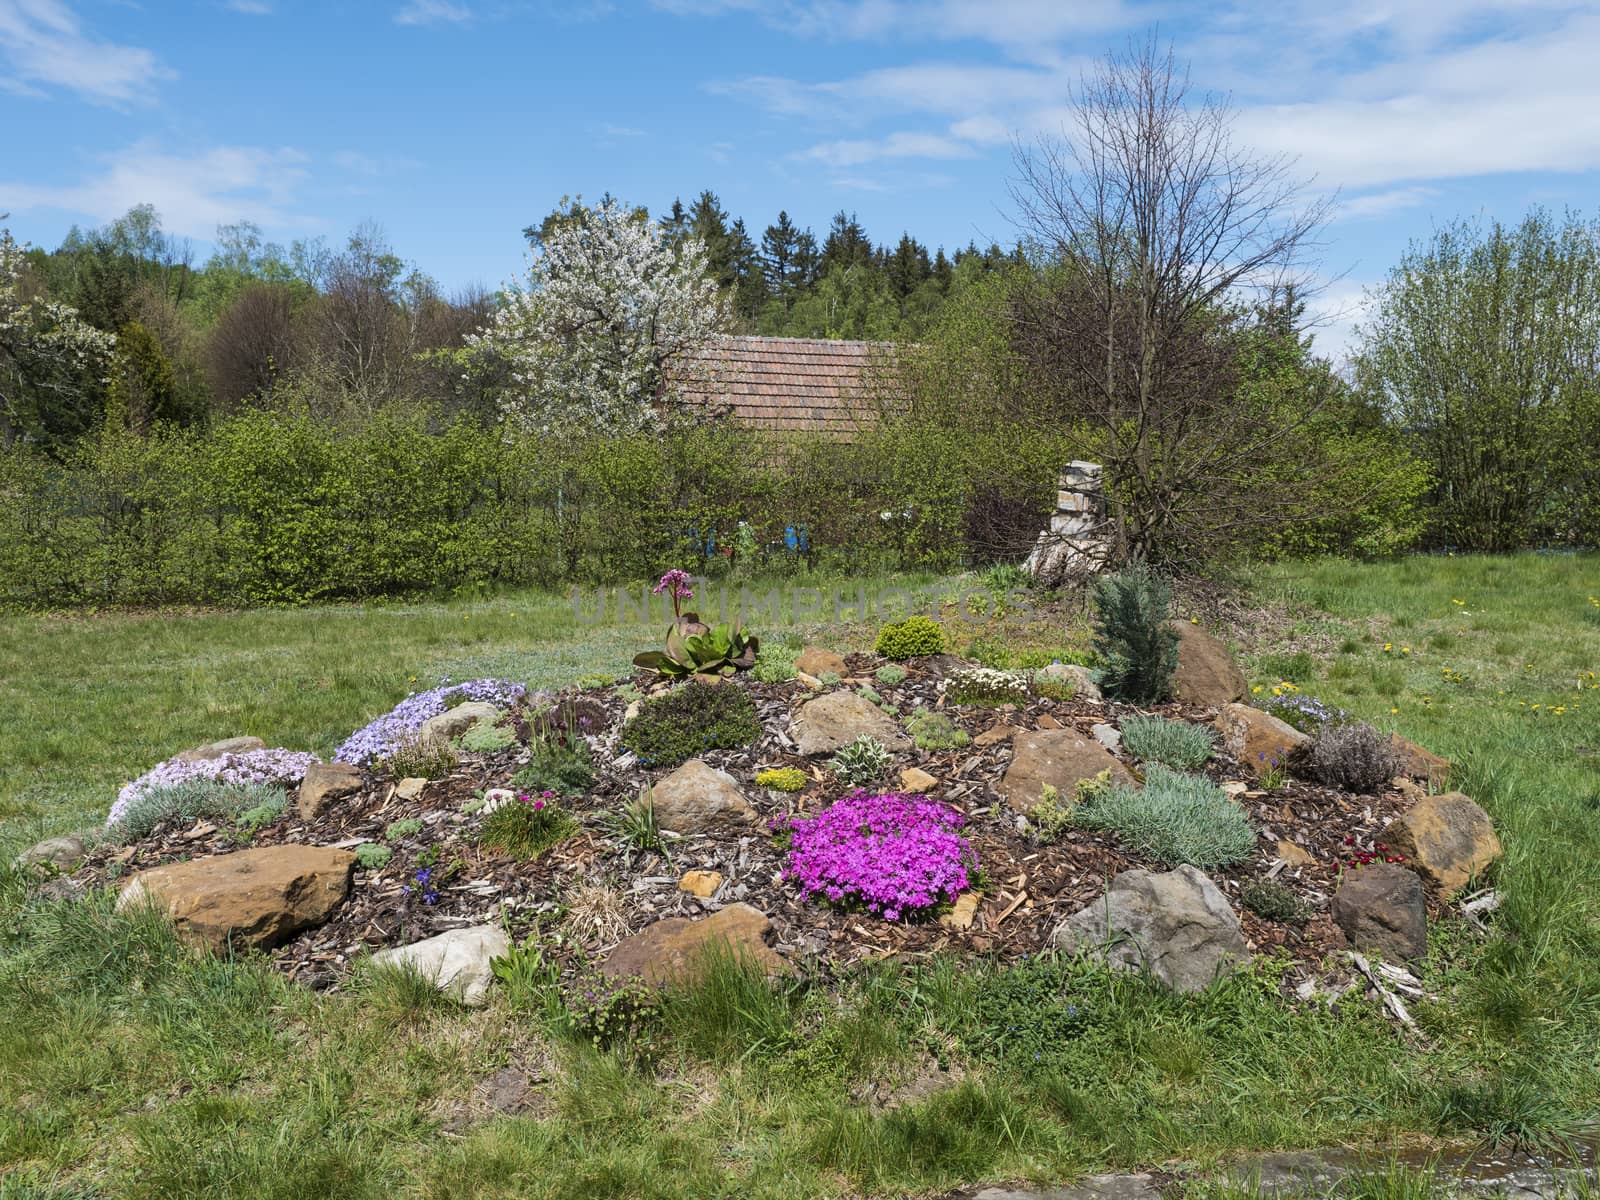 View on spring garden with beautiful rock garden in full bloom with pink Phlox subulata, Armeria maritima, sea thrift, Bergenia or elephants ears, carnation and many other colorful blooming flowers